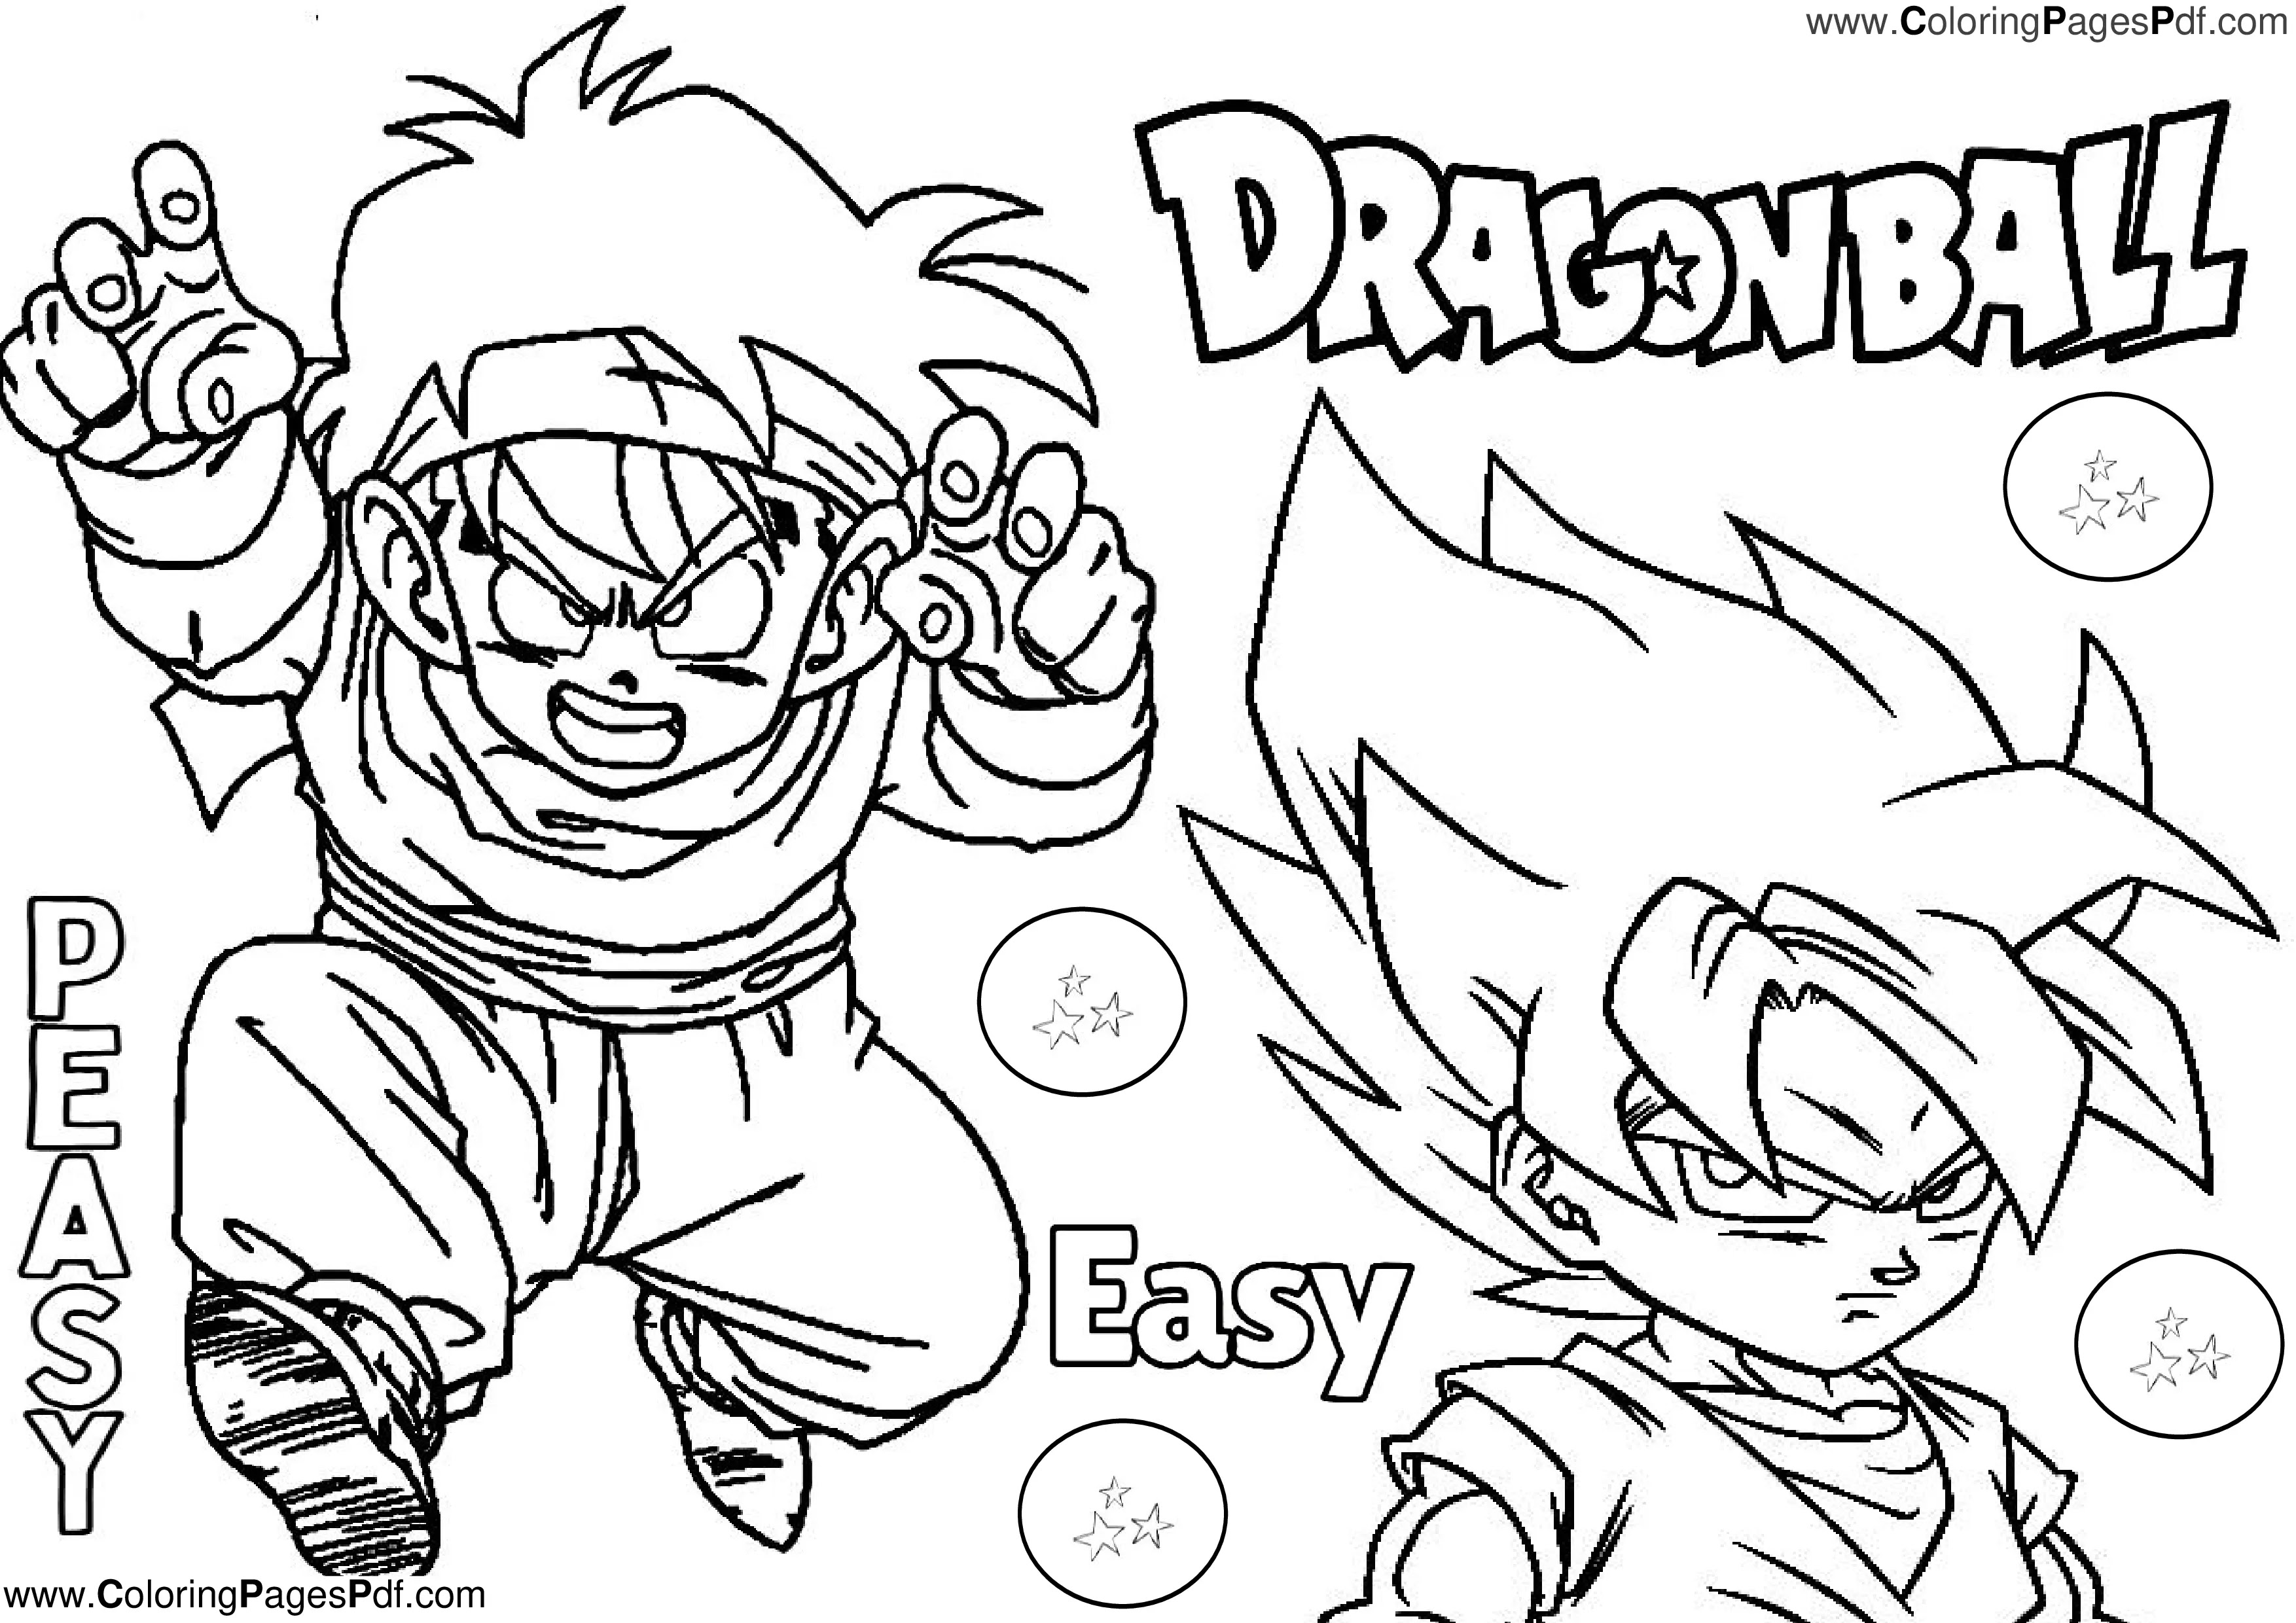 Dragon ball z coloring pages for kids